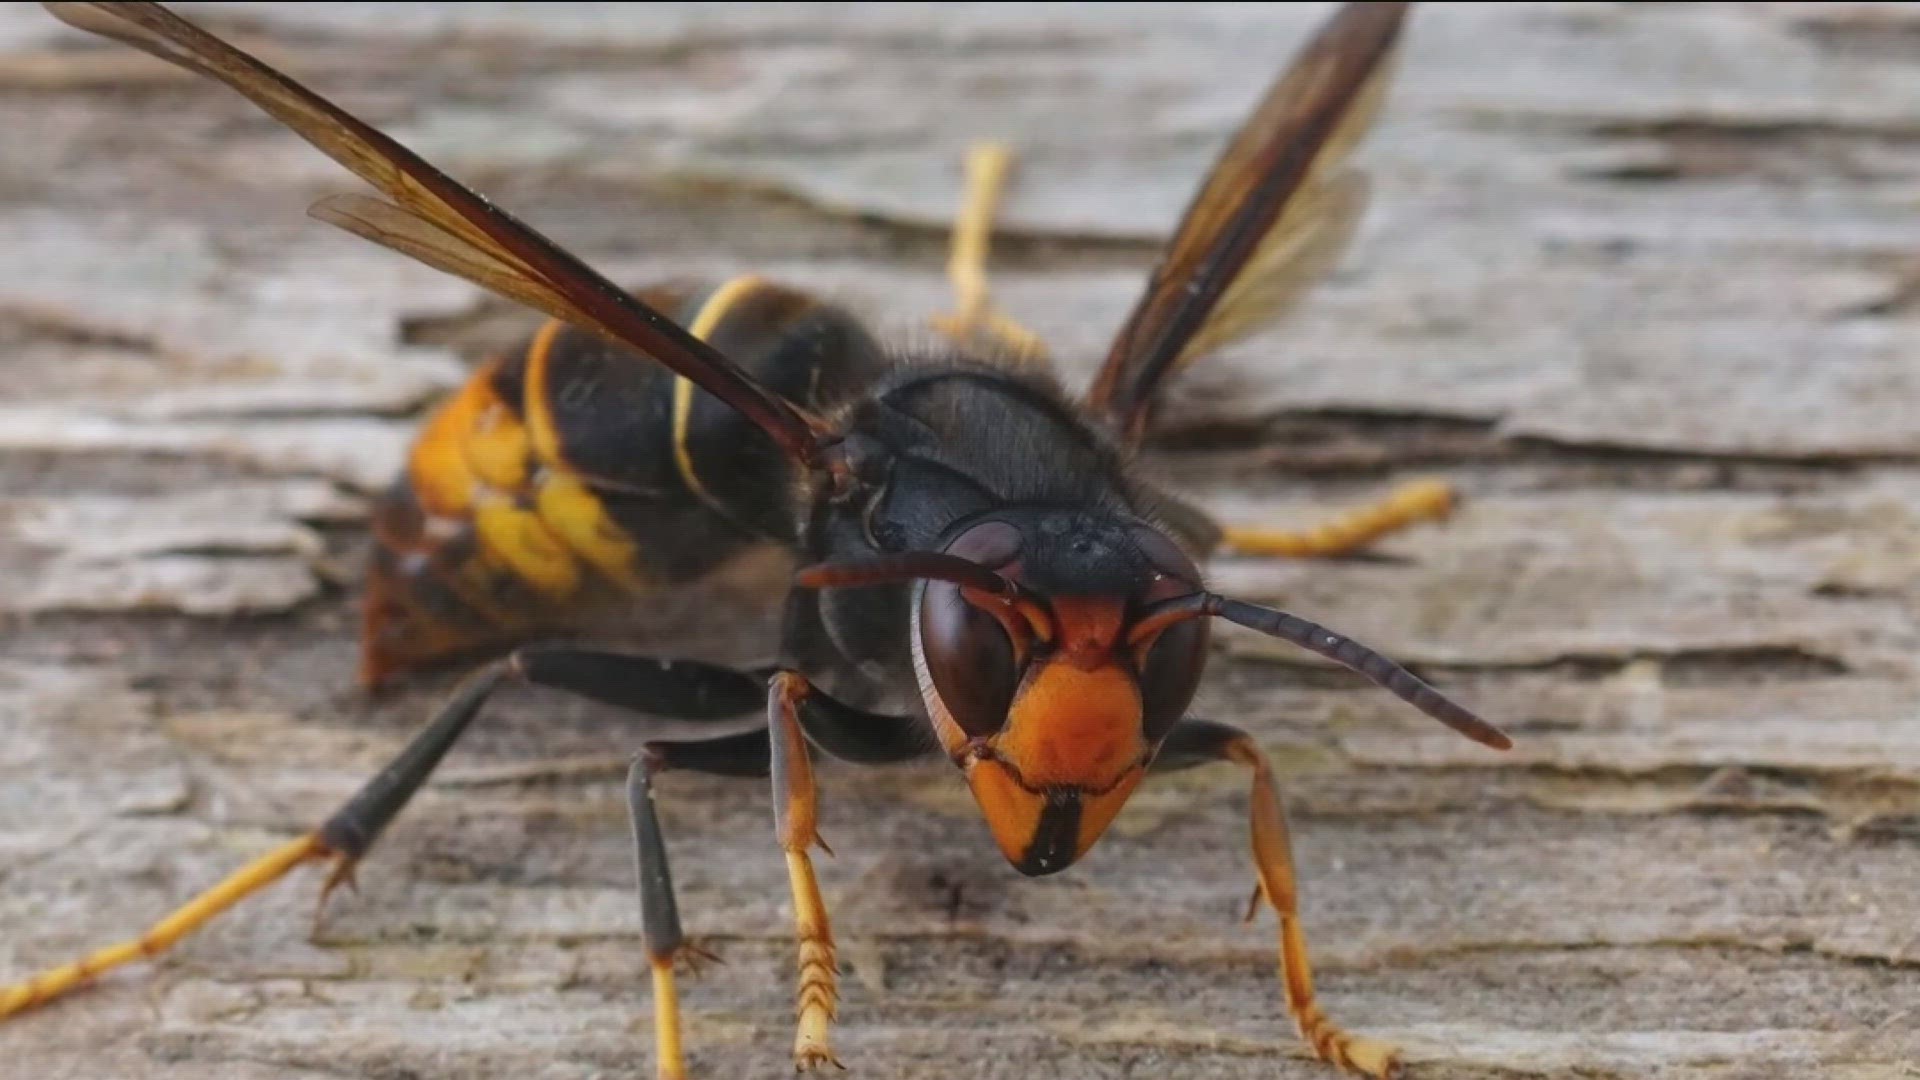 The yellow-legged hornet, or Asian hornet (Vespa velutina), was discovered by a beekeeper in Savannah.